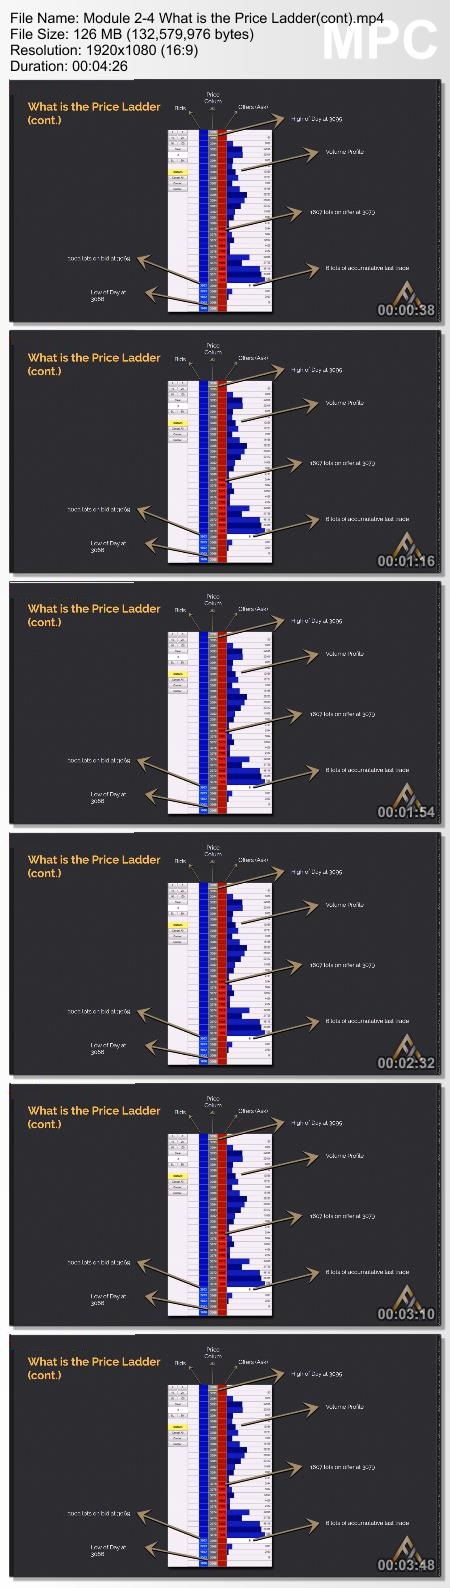 Axia Futures - Trading with Price Ladder & Order Flow Strategies